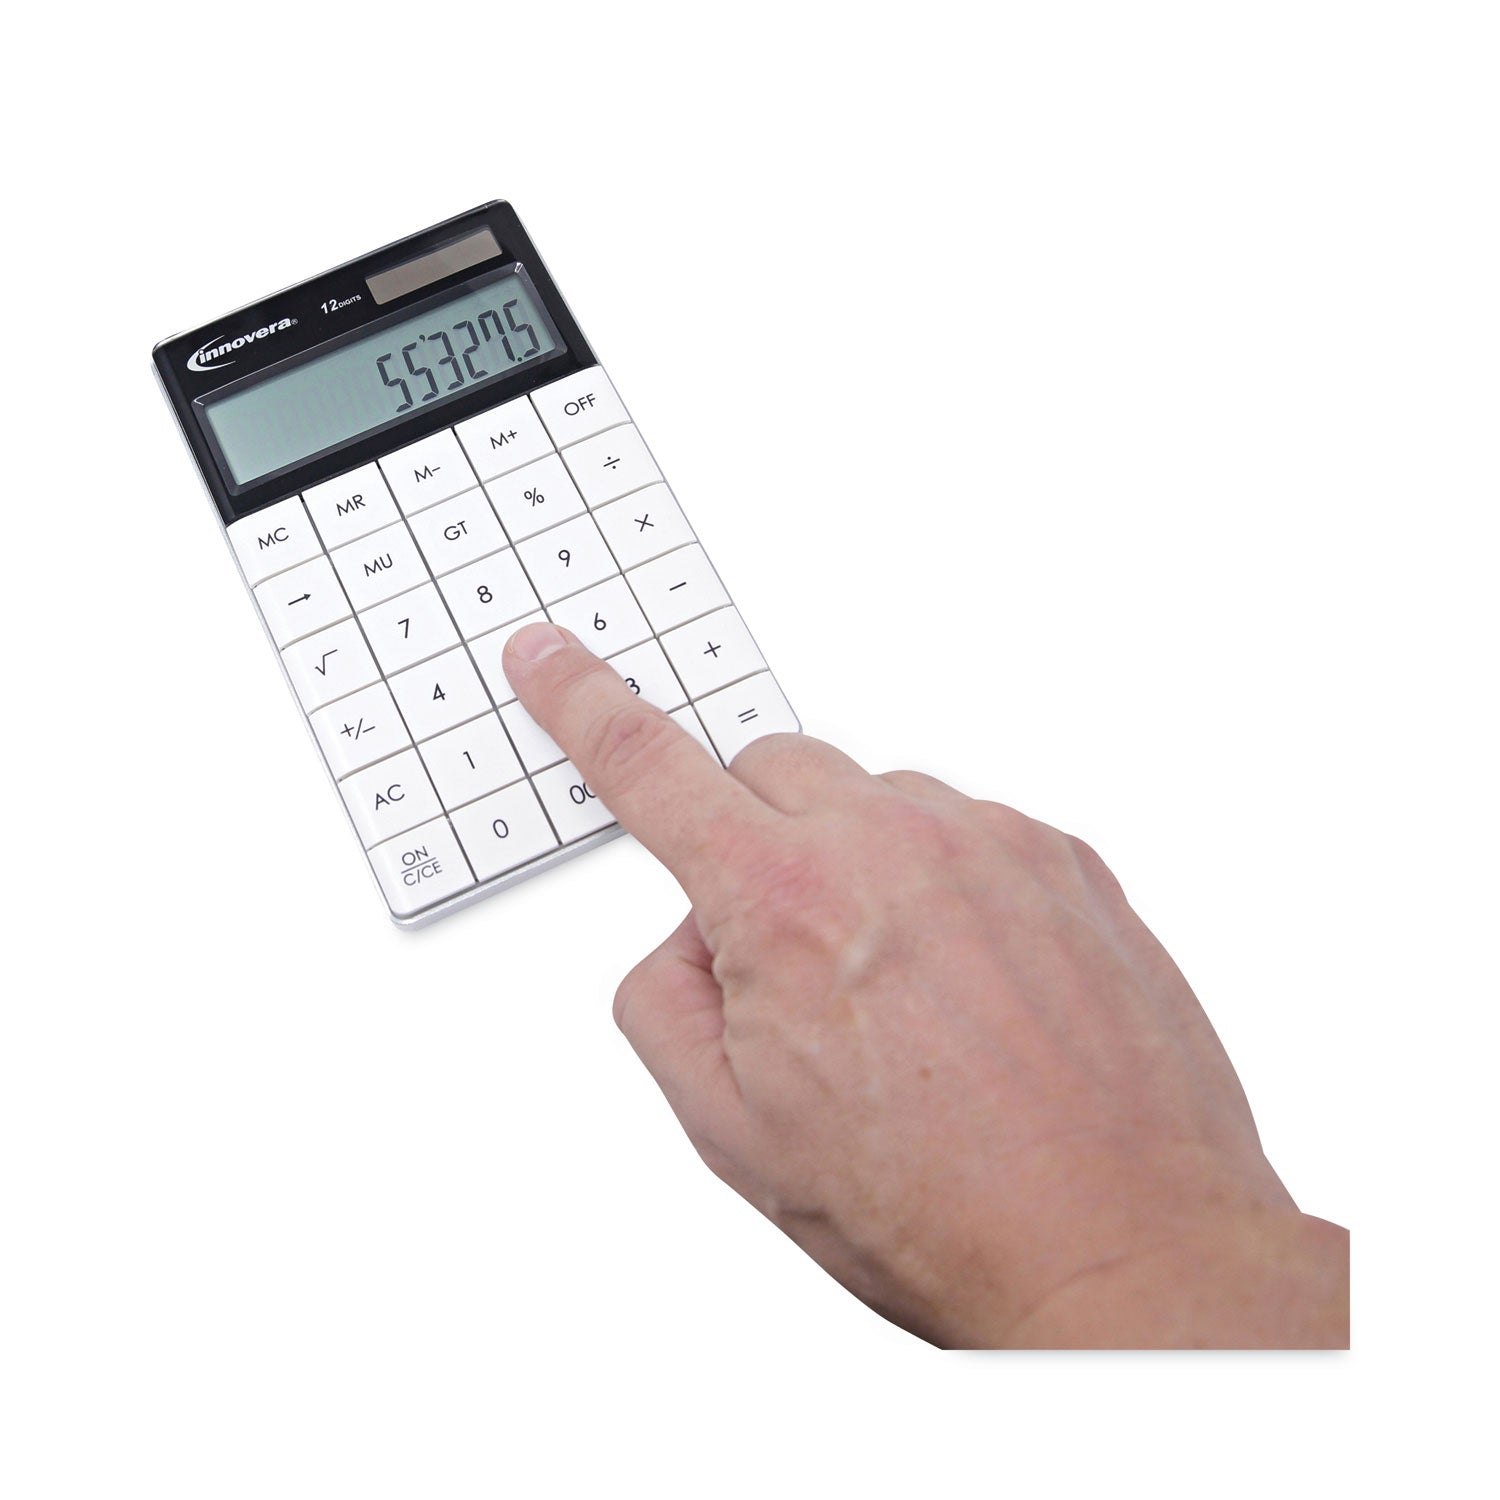 15973-large-button-calculator-12-digit-lcd_ivr15973 - 5